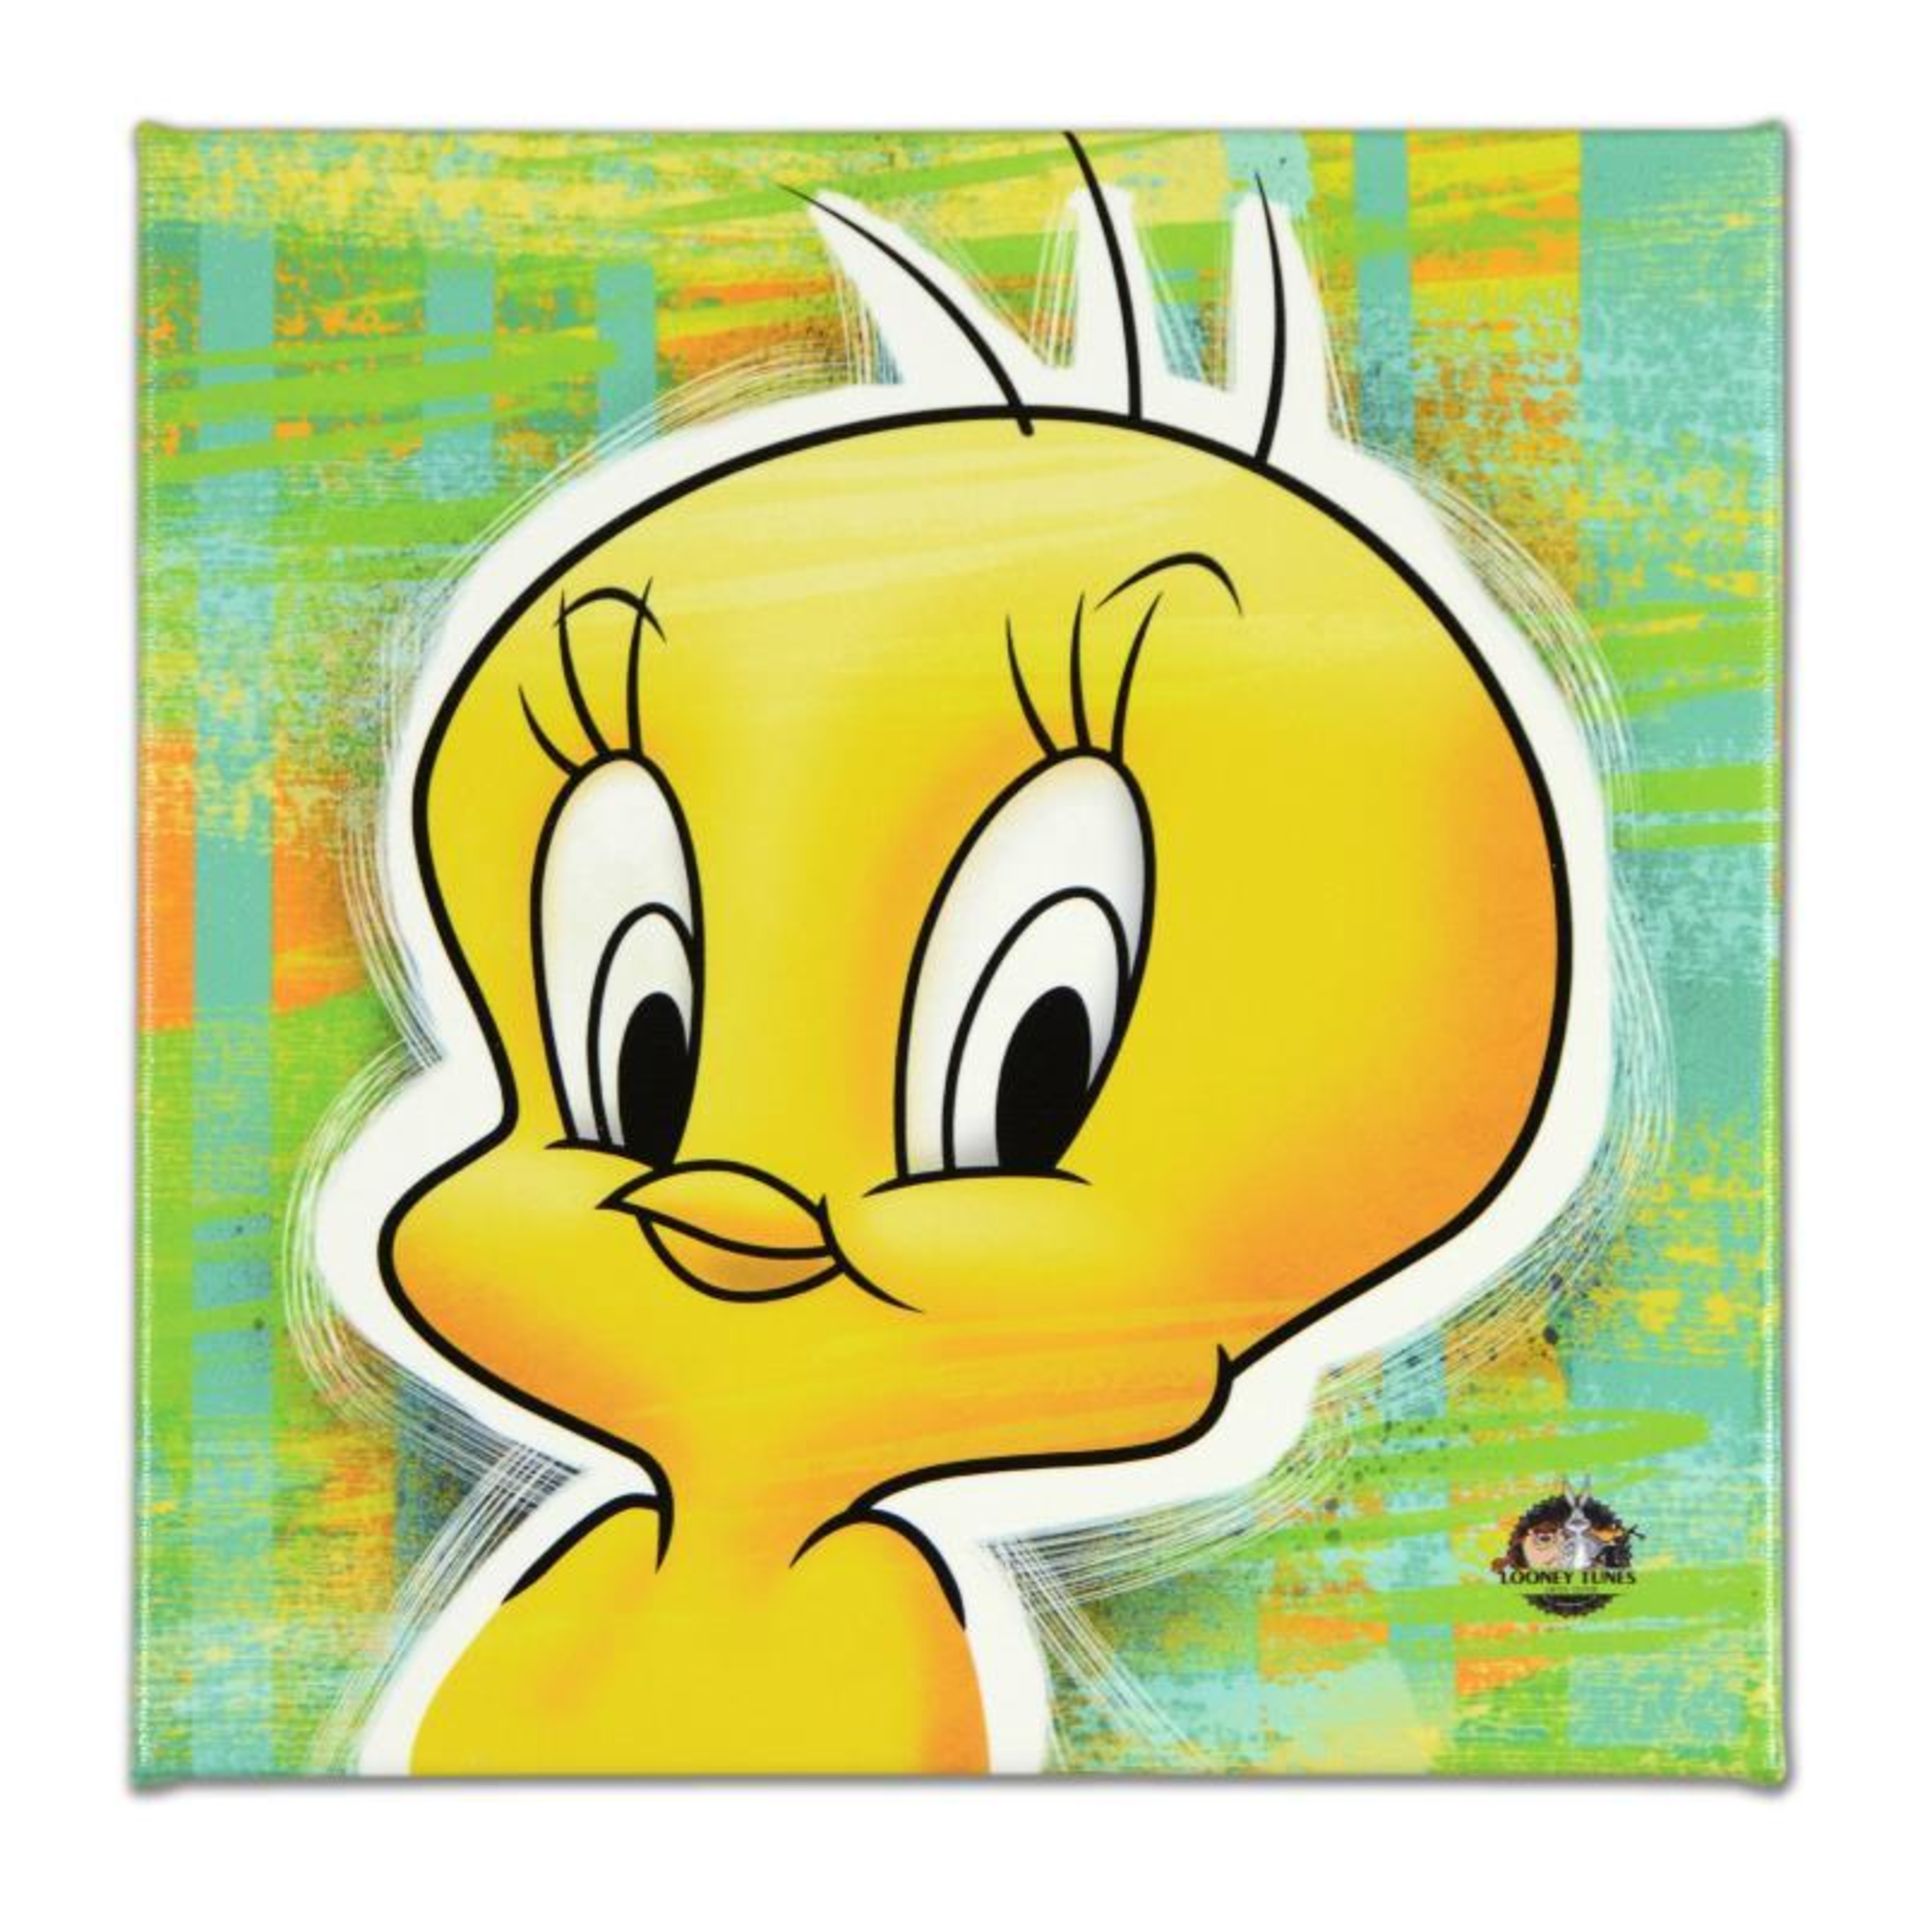 Looney Tunes, "Tweety Bird" Numbered Limited Edition on Canvas with COA. This pi